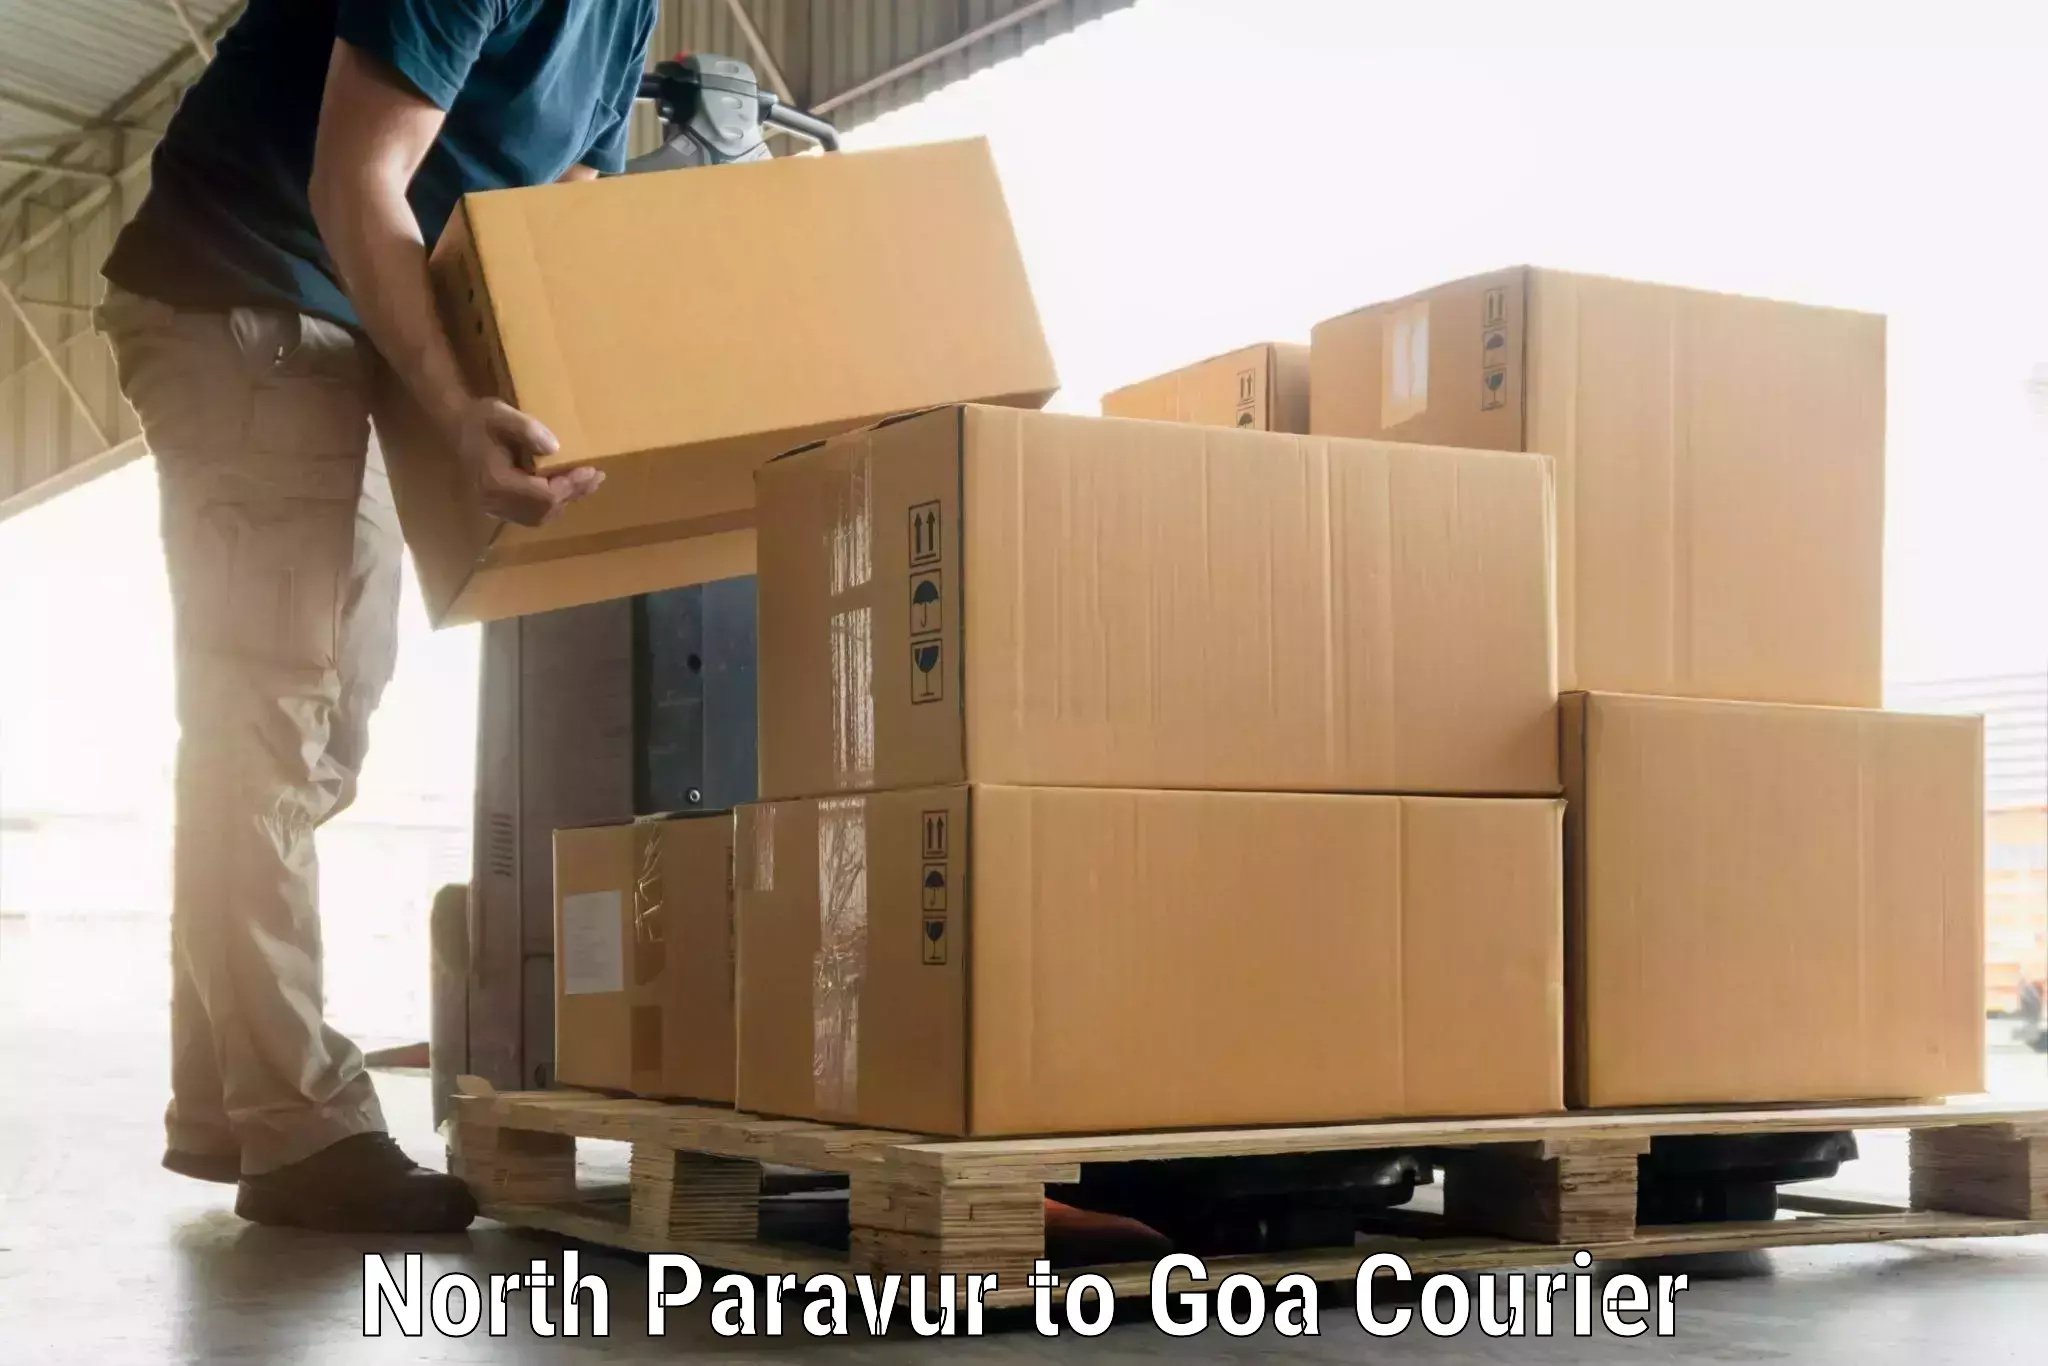 Luggage transport consultancy North Paravur to Goa